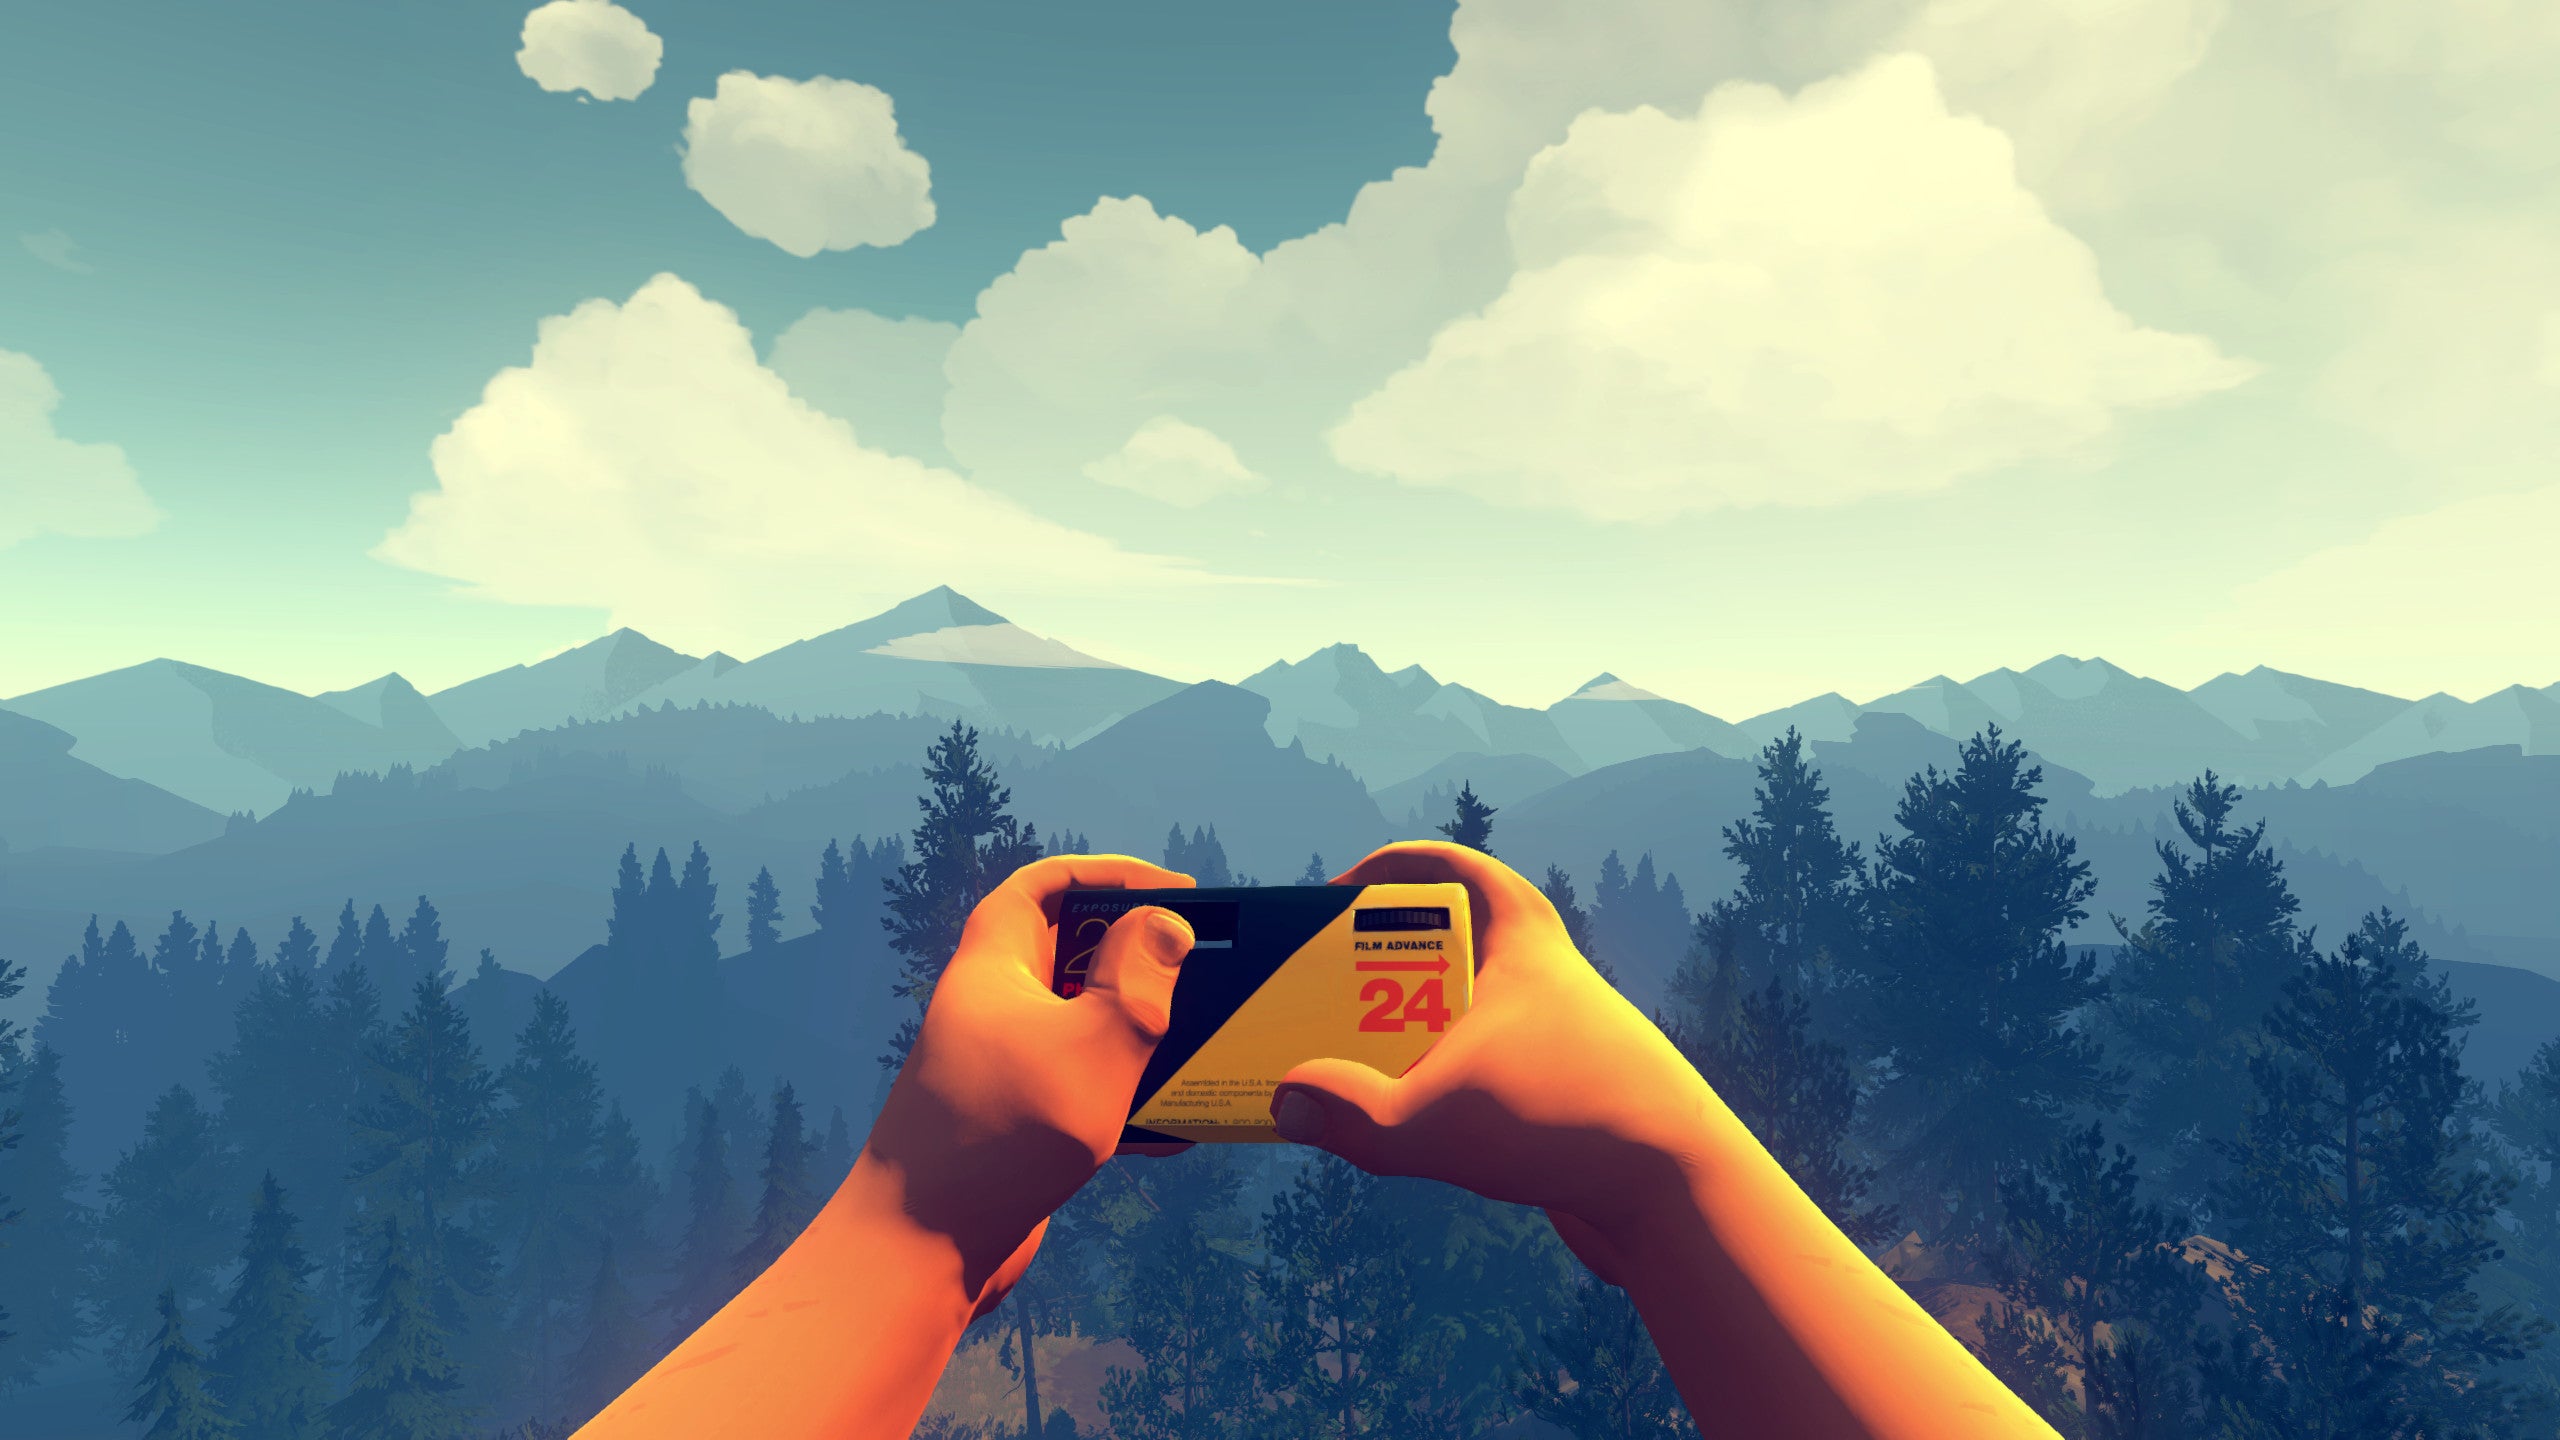 Holding a camera up ready to take a photo of mountains in a Firewatch screenshot.